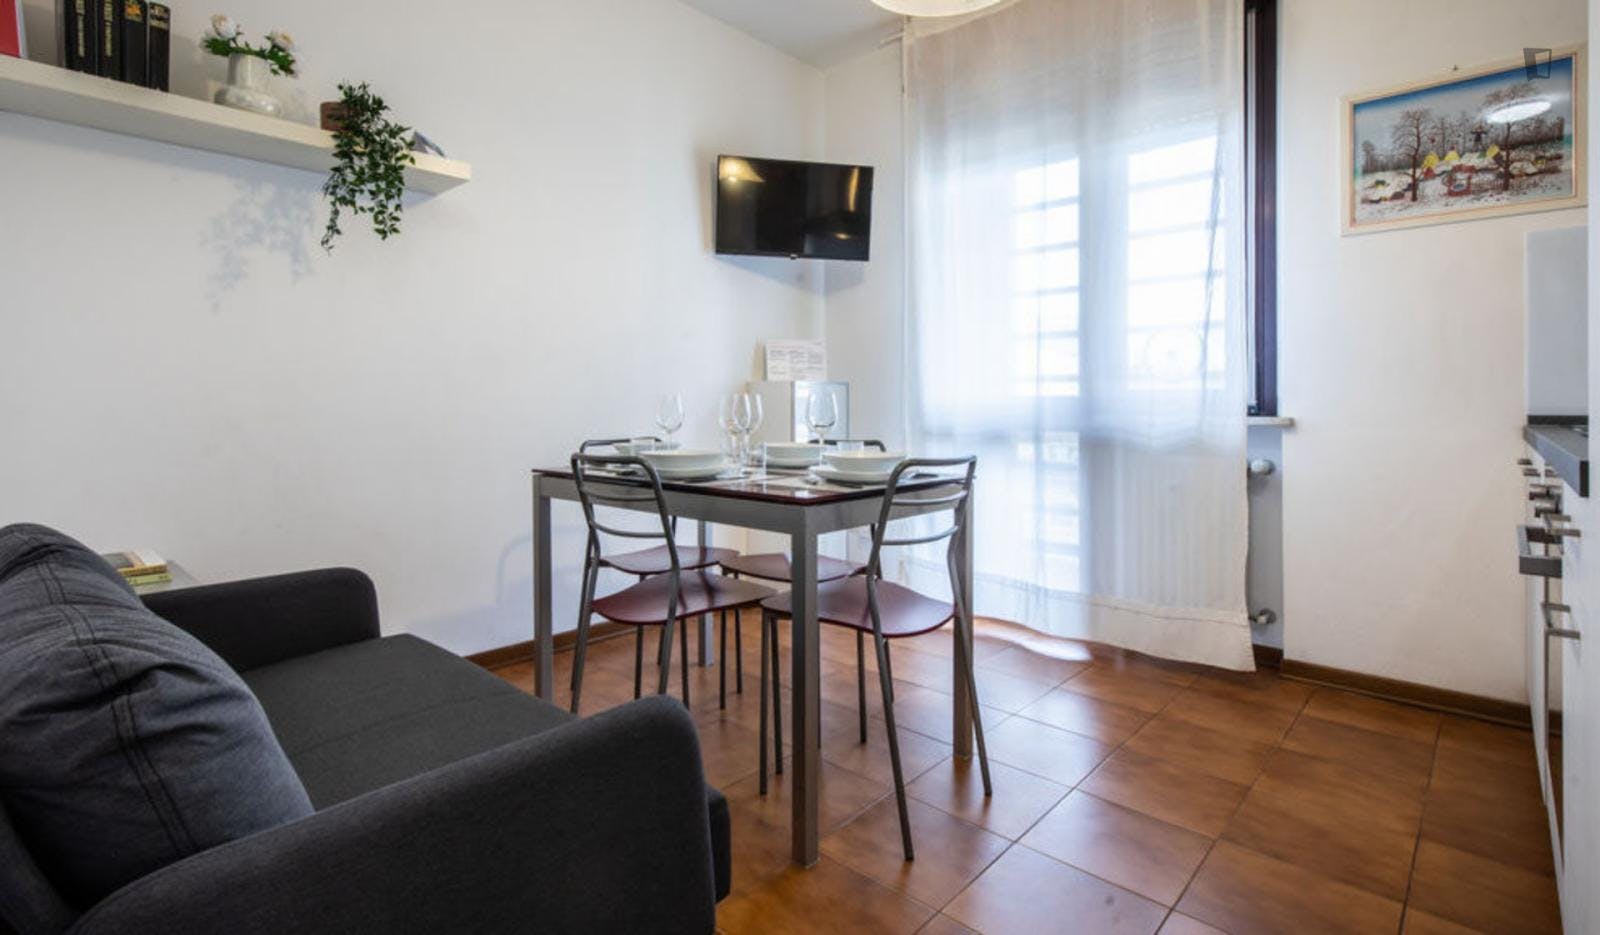 Inviting 1-bedroom flat in Tricesimo